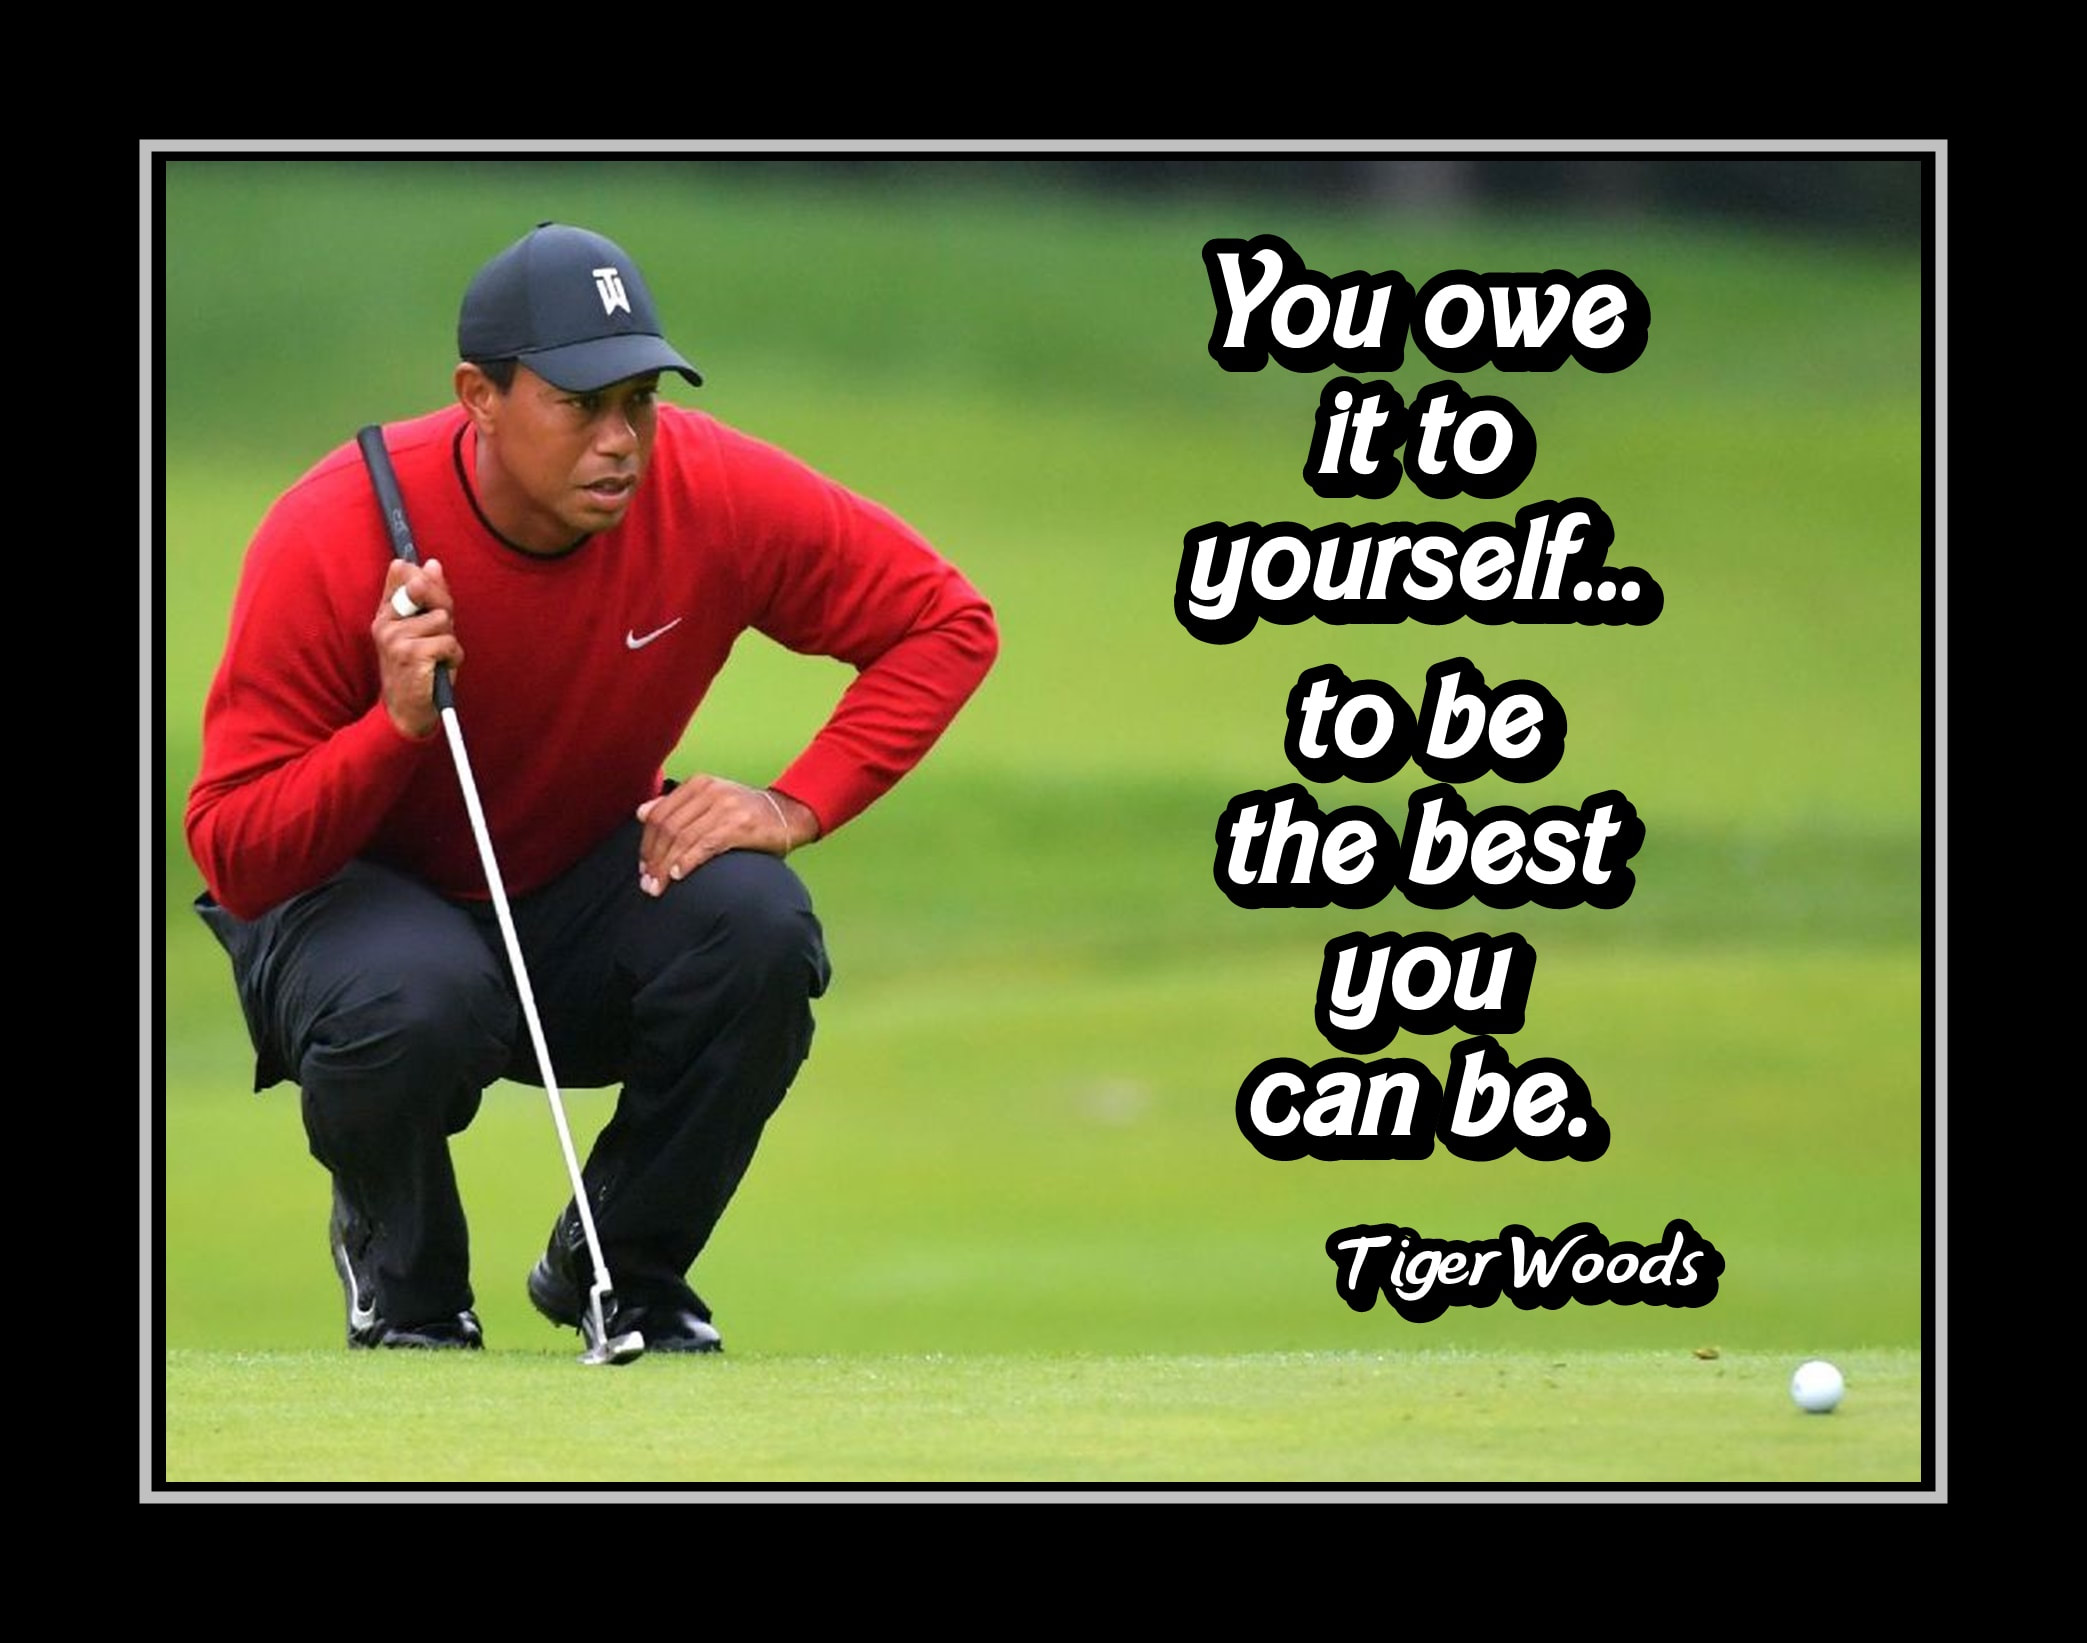 Inspirational Golf Quotes Tiger Woods - Daily Quotes